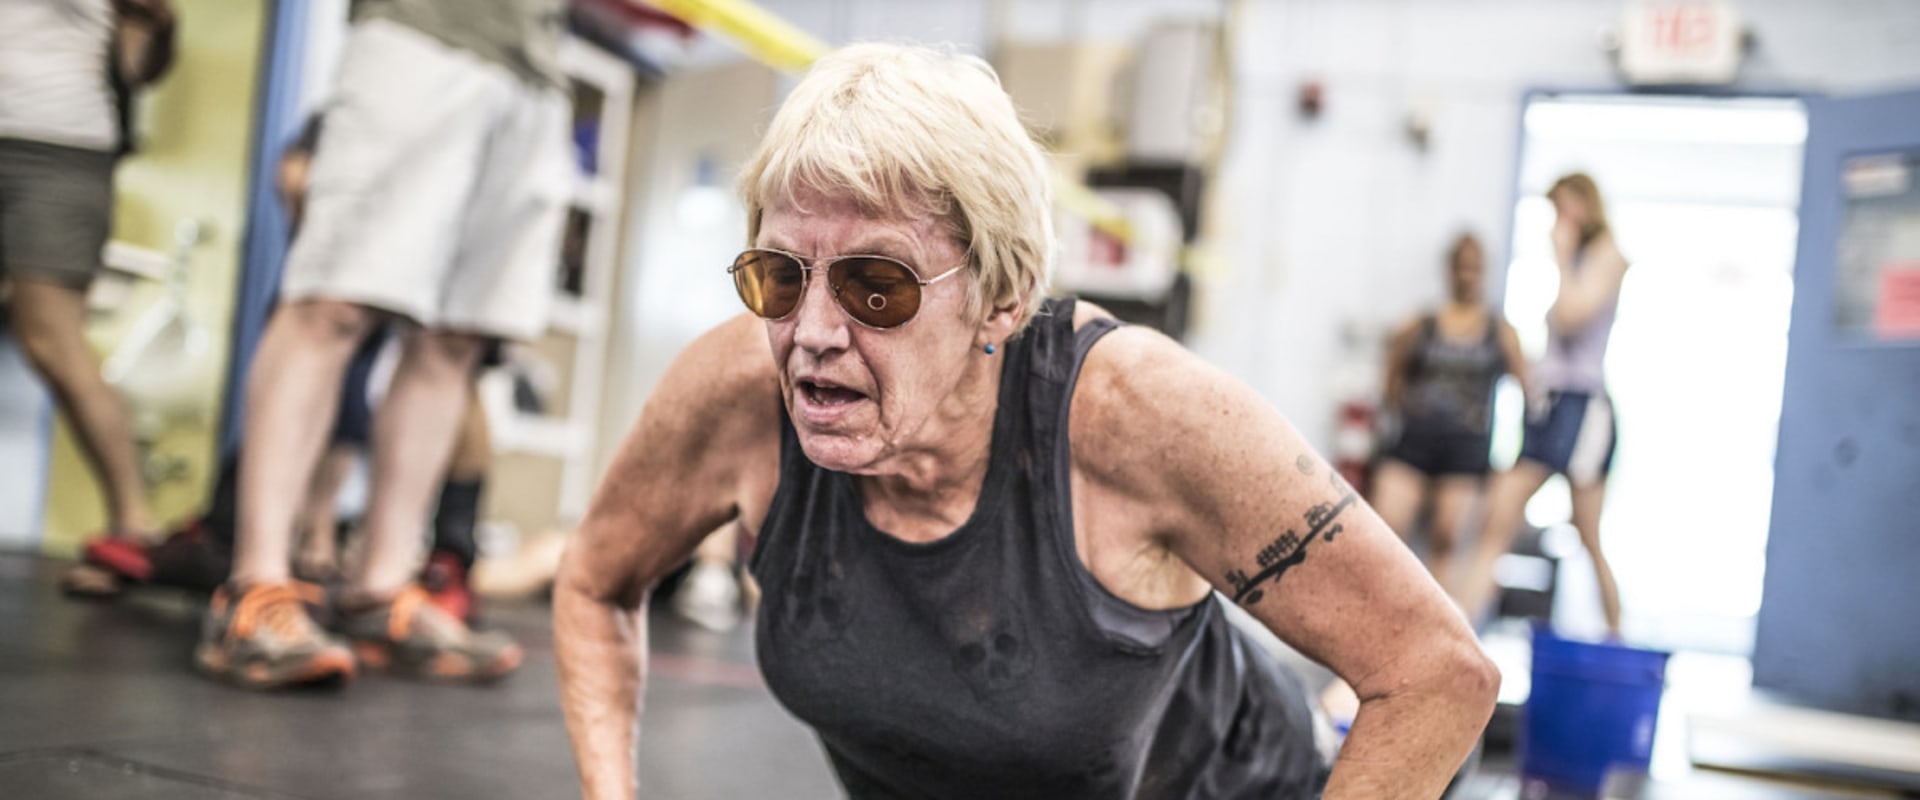 Age Requirements for Crossfit Competitions